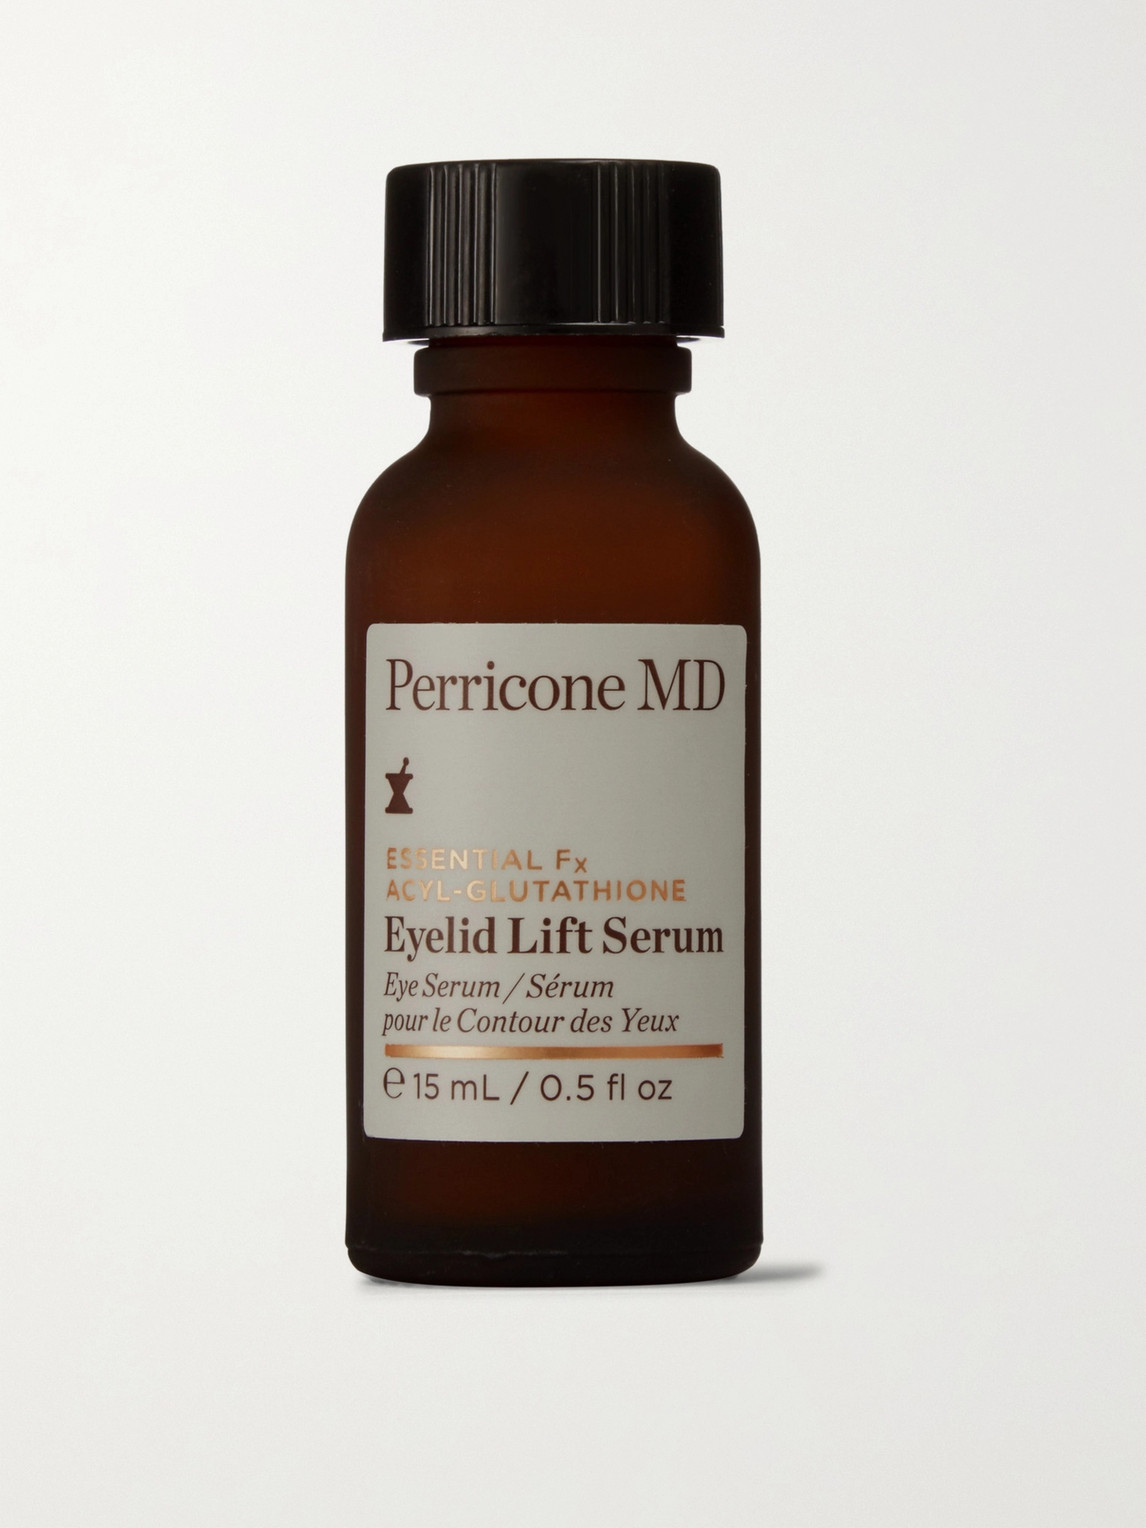 Perricone Md Essential Fx Eyelid Lift Serum, 15ml In Colorless